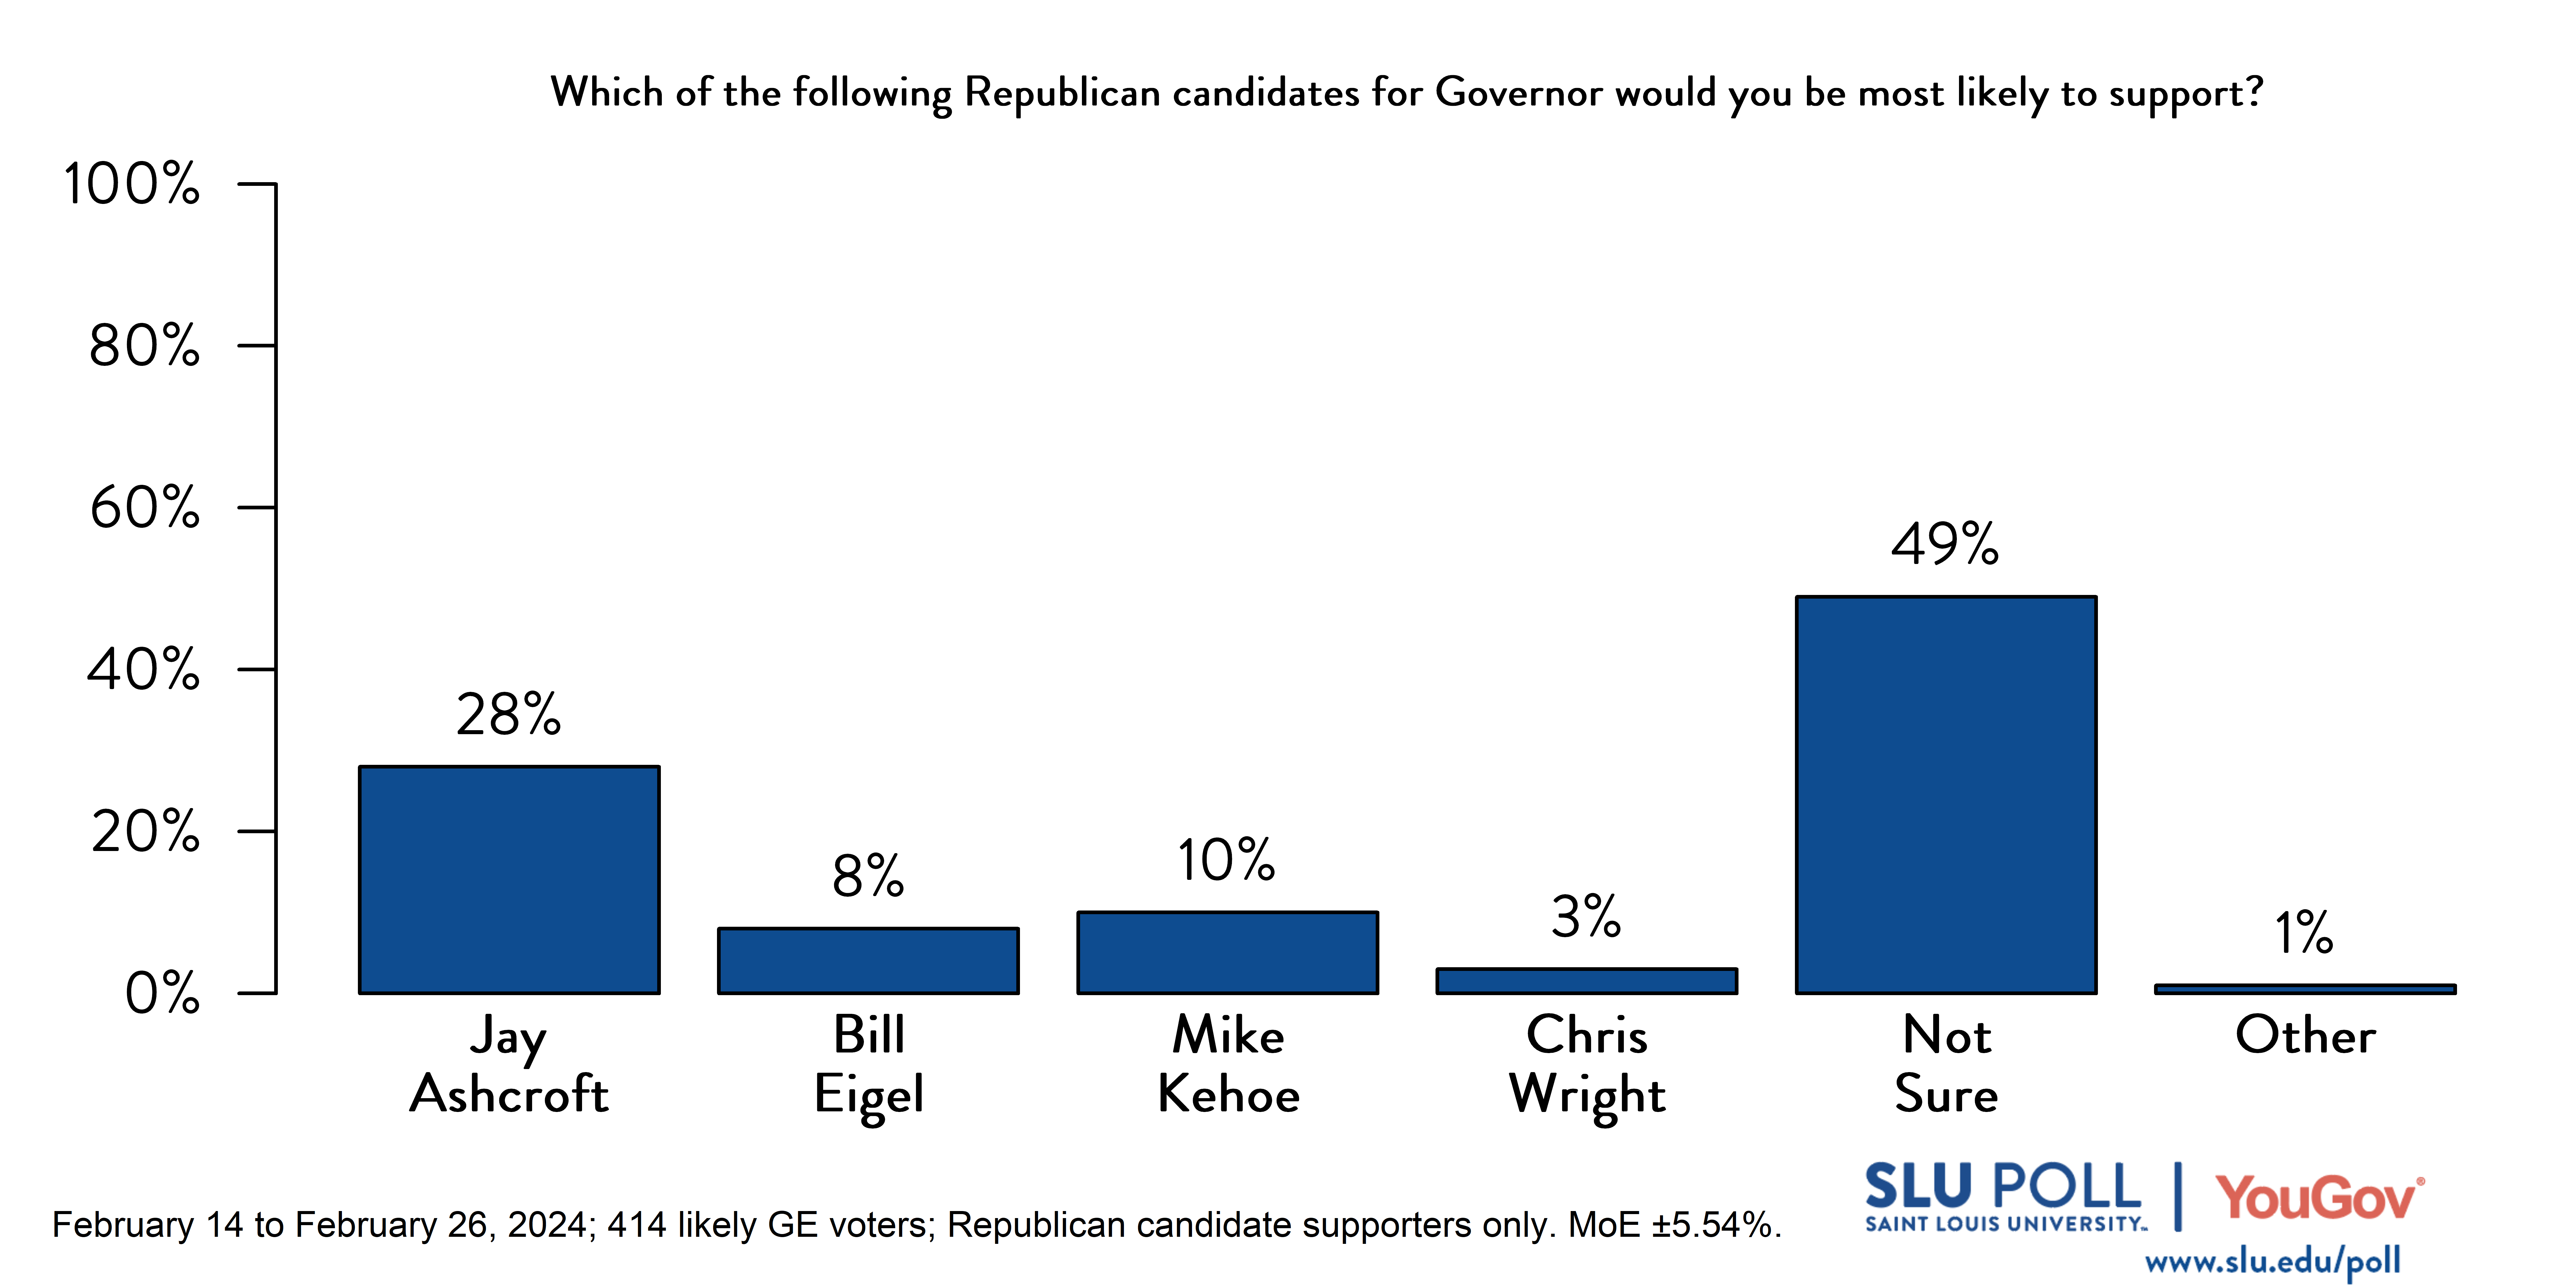 Likely voters' responses to 'Which of the following Republican candidates for Governor would you be most likely to support?': 28% Jay Ashcroft, 8% Bill Eigel, 10% Mike Kehoe, 3% Chris Wright, 49% Not sure, and 1% Other.